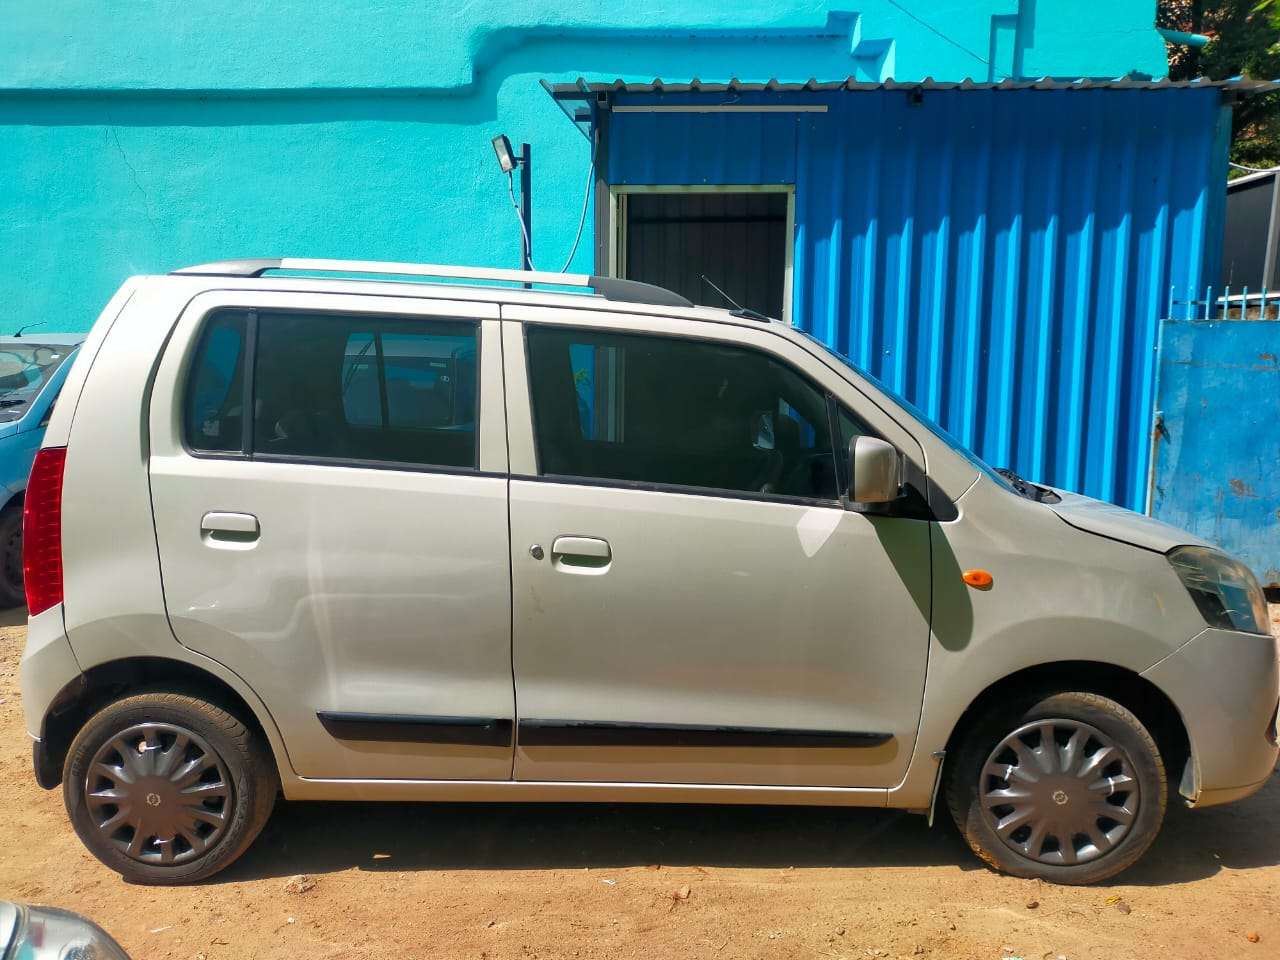 1220-for-sale-Maruthi-Suzuki-Wagon-R-1.0-Petrol-Second-Owner-2011-PY-registered-rs-275000